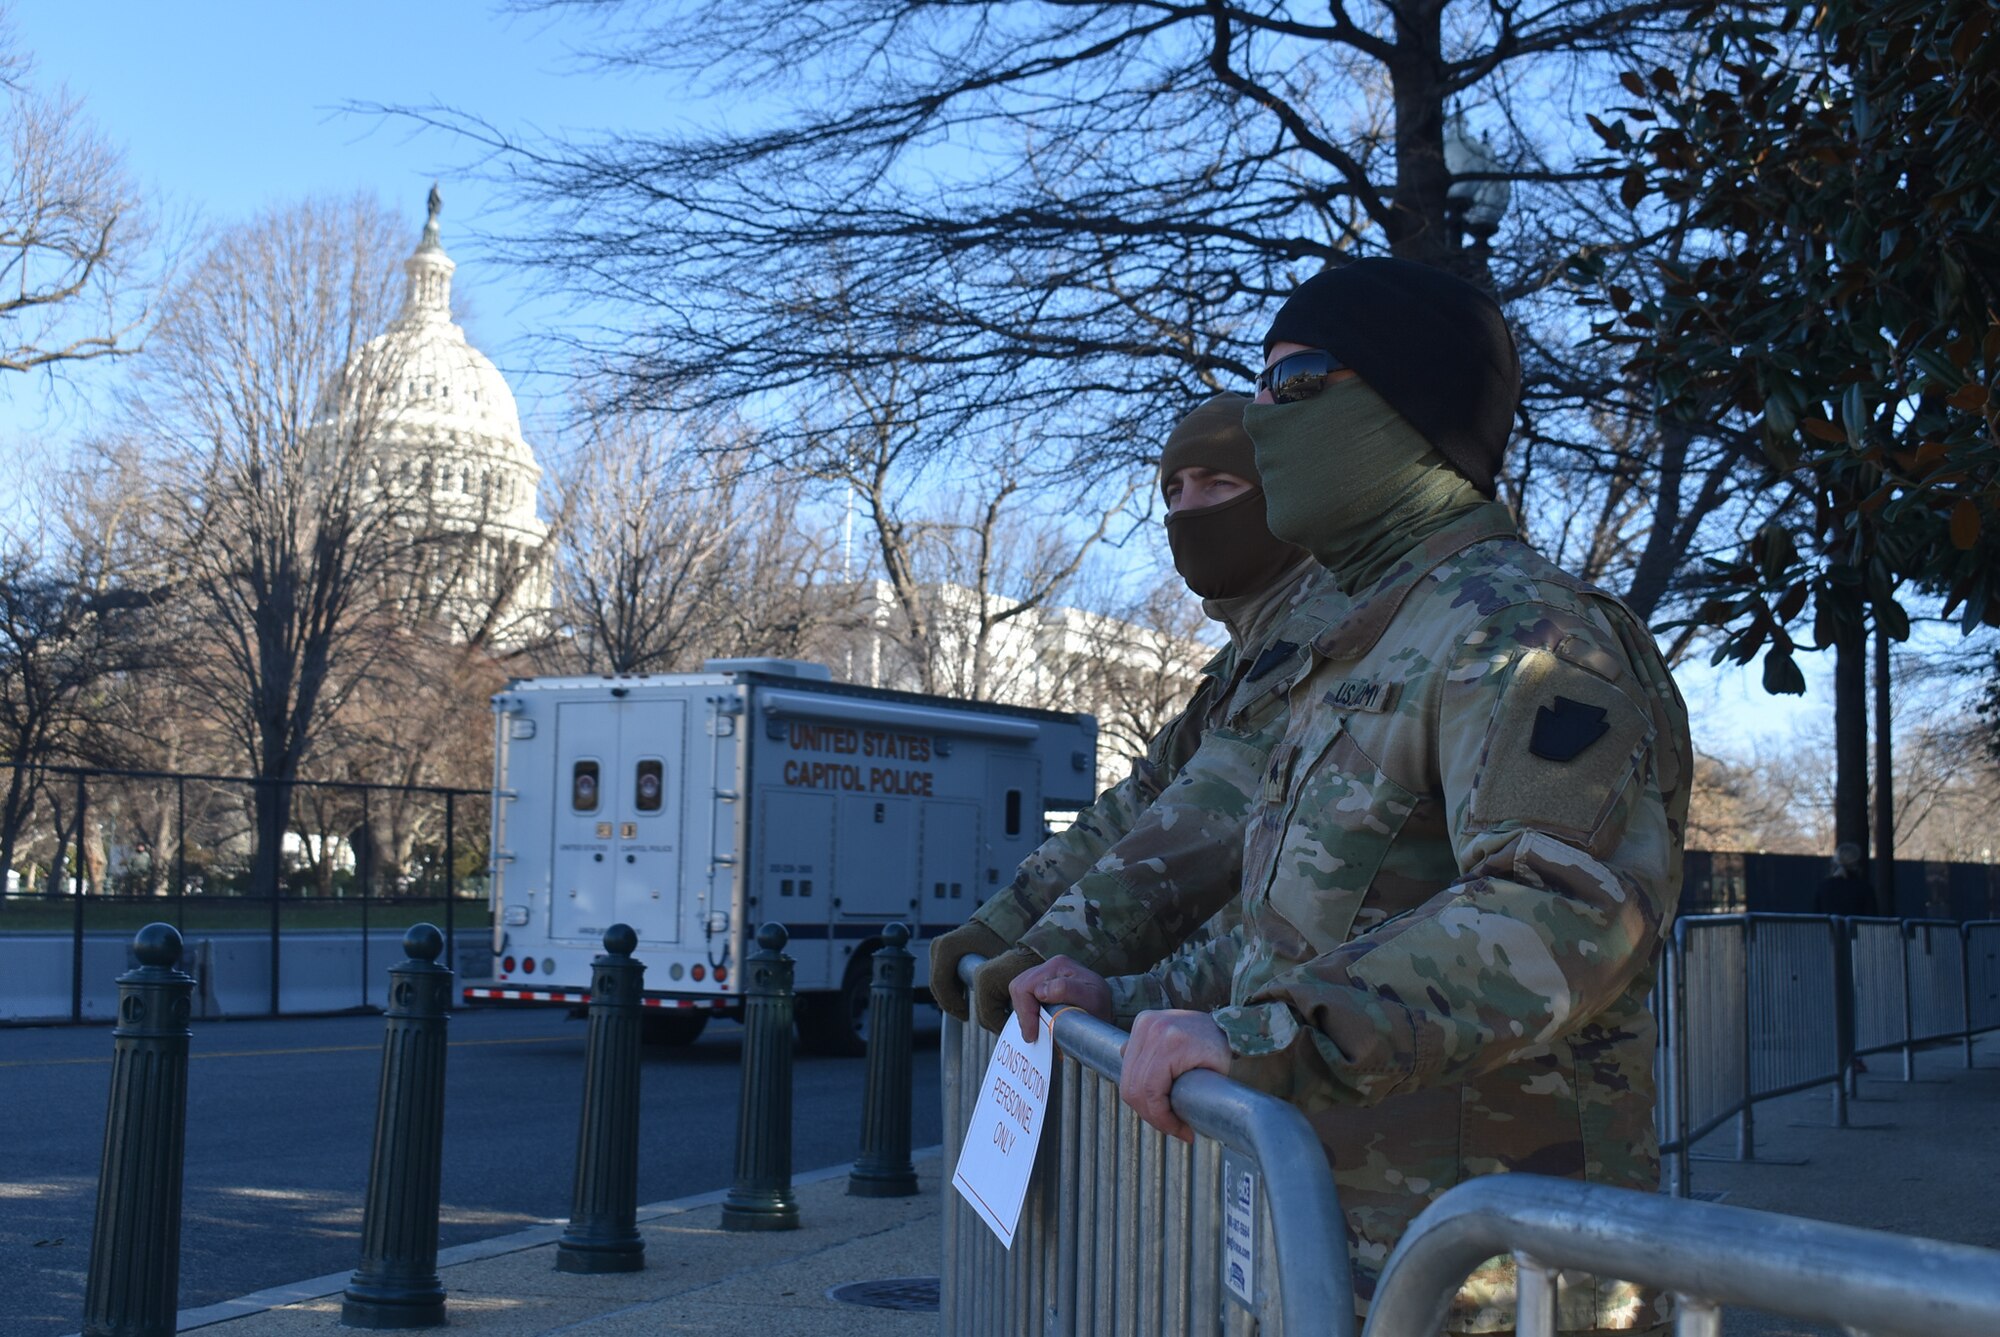 Sgt. Joshua Zook, right, and Spc. Kenneth Steinly from the 2nd Squadron, 104th Cavalry Regiment, 56th Stryker Brigade Combat Team, Pennsylvania Army National Guard stand guard in Washington, D.C., on Jan. 10, 2021.